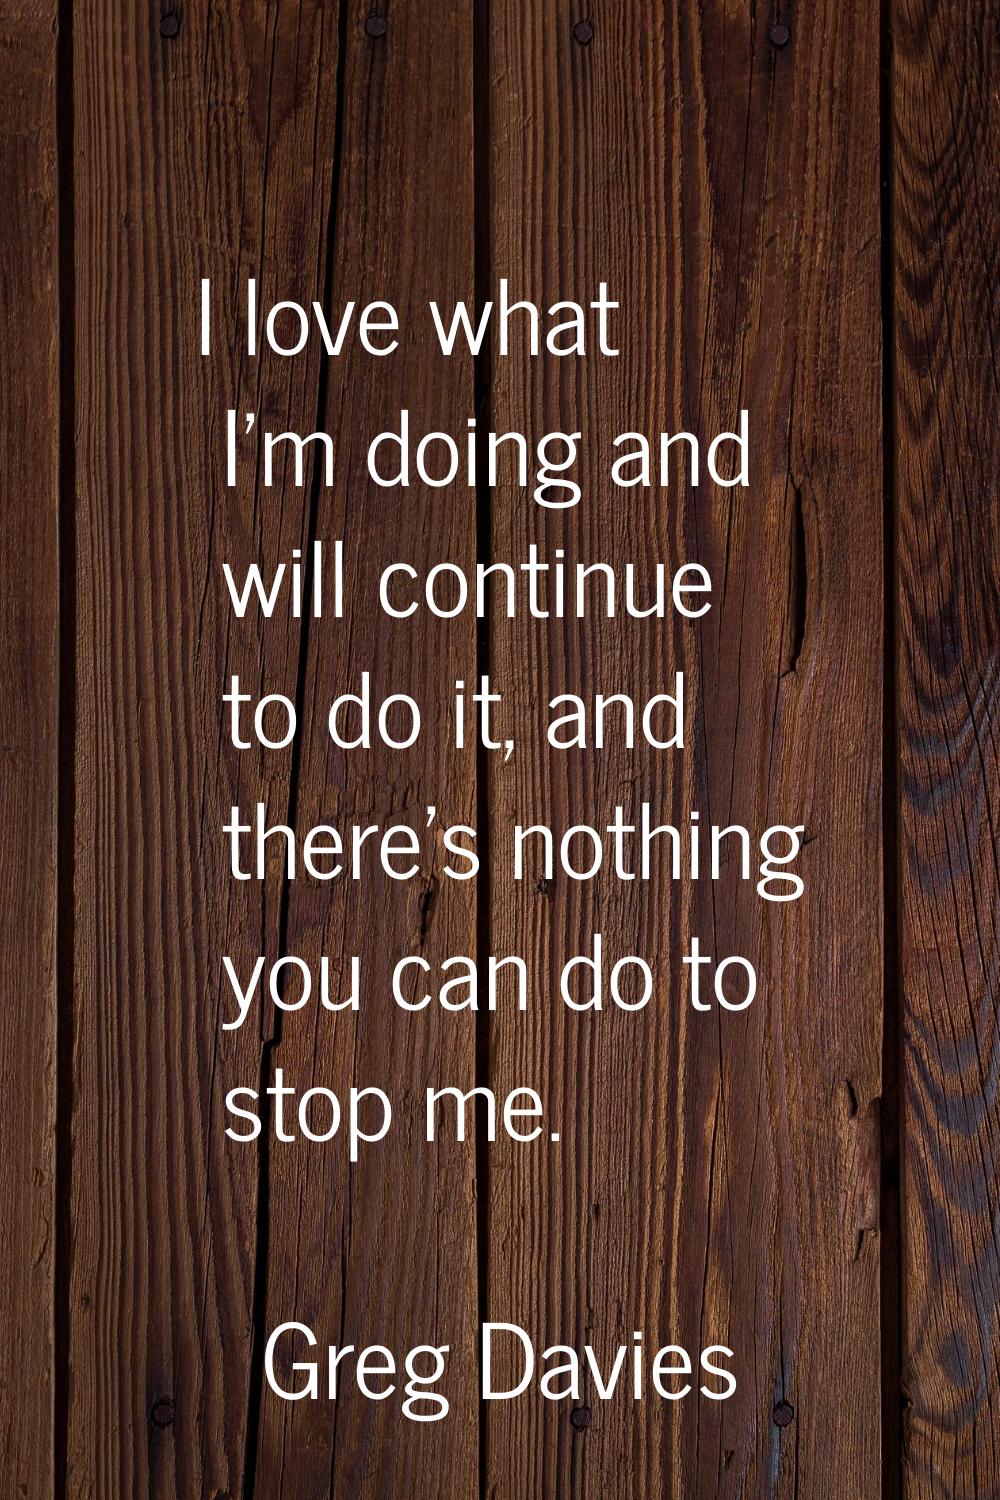 I love what I'm doing and will continue to do it, and there's nothing you can do to stop me.